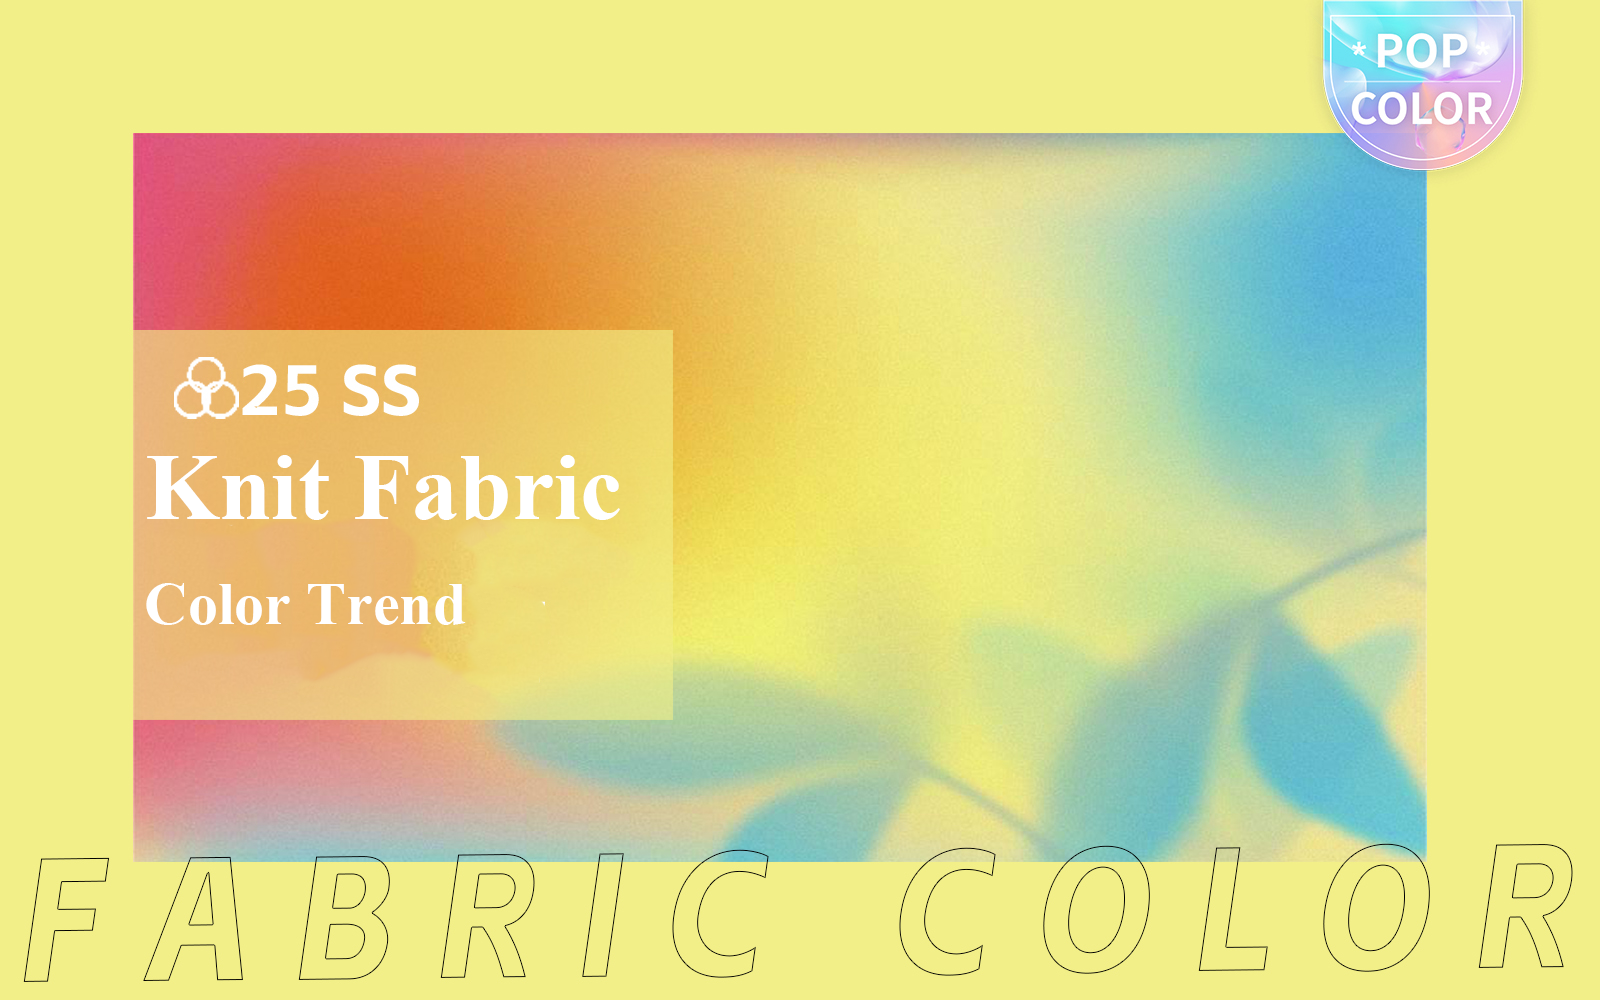 Key Color Trend for Knitted Fabrics